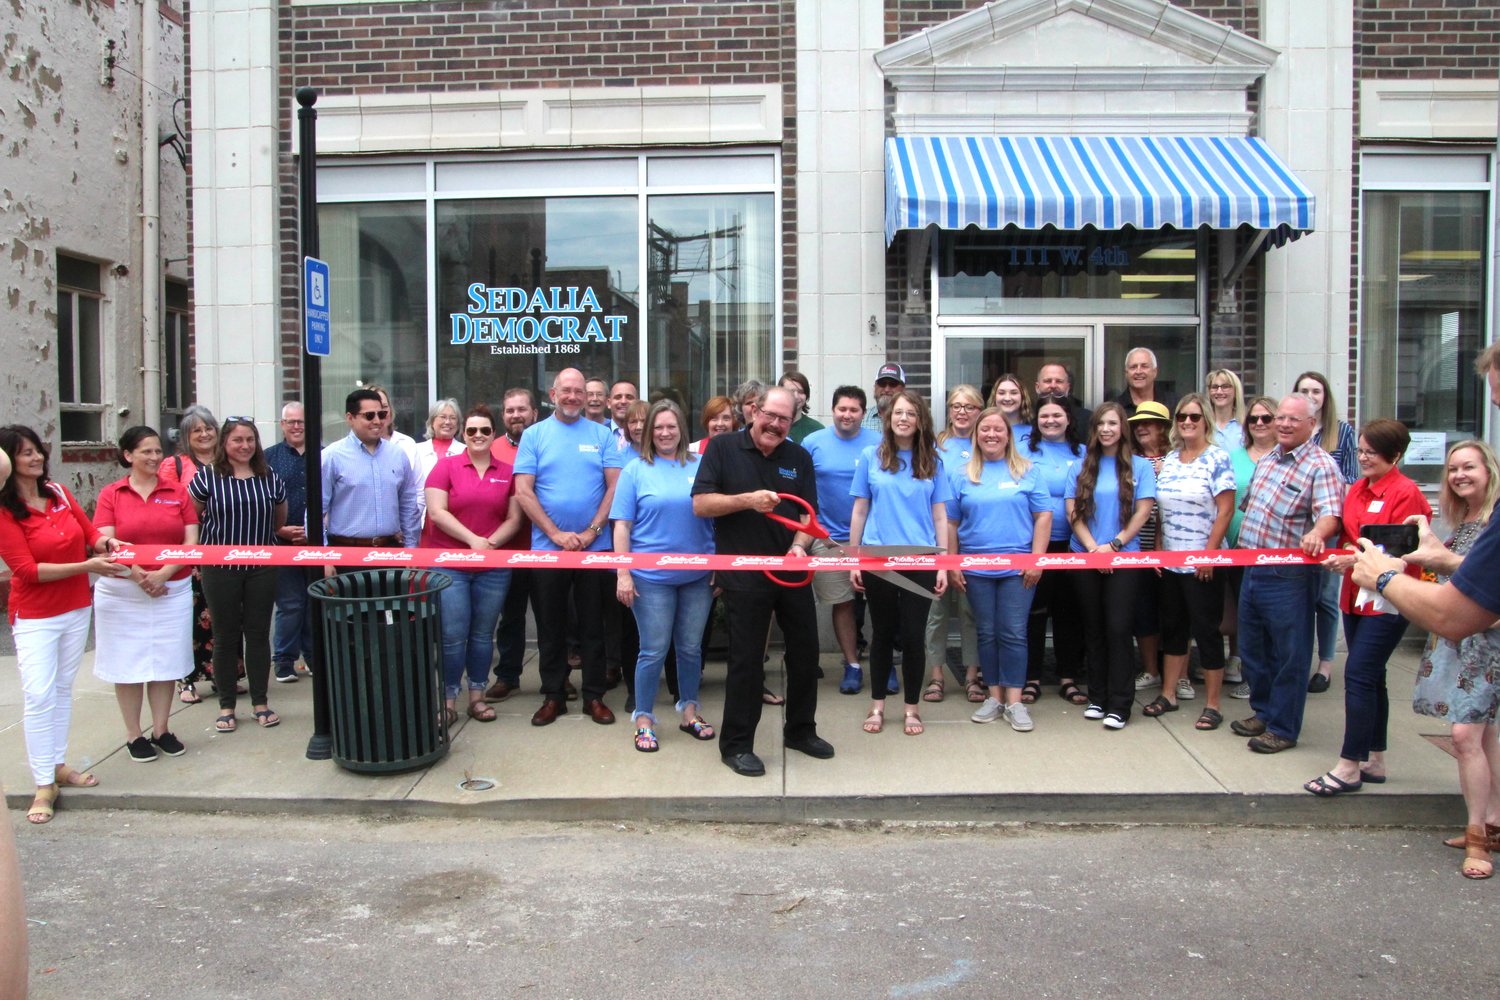 Surrounded by community members, elected officials and employees, Sedalia Democrat Publisher Jim Perry cuts the ribbon celebrating the Sedalia Democrat’s new location at 111 W. Fourth St. during an open house hosted Friday, June 10. The new building, formerly the Sedalia Water Department, is across the street from one of the Democrat’s past locations at 108-110 W. Fourth St.